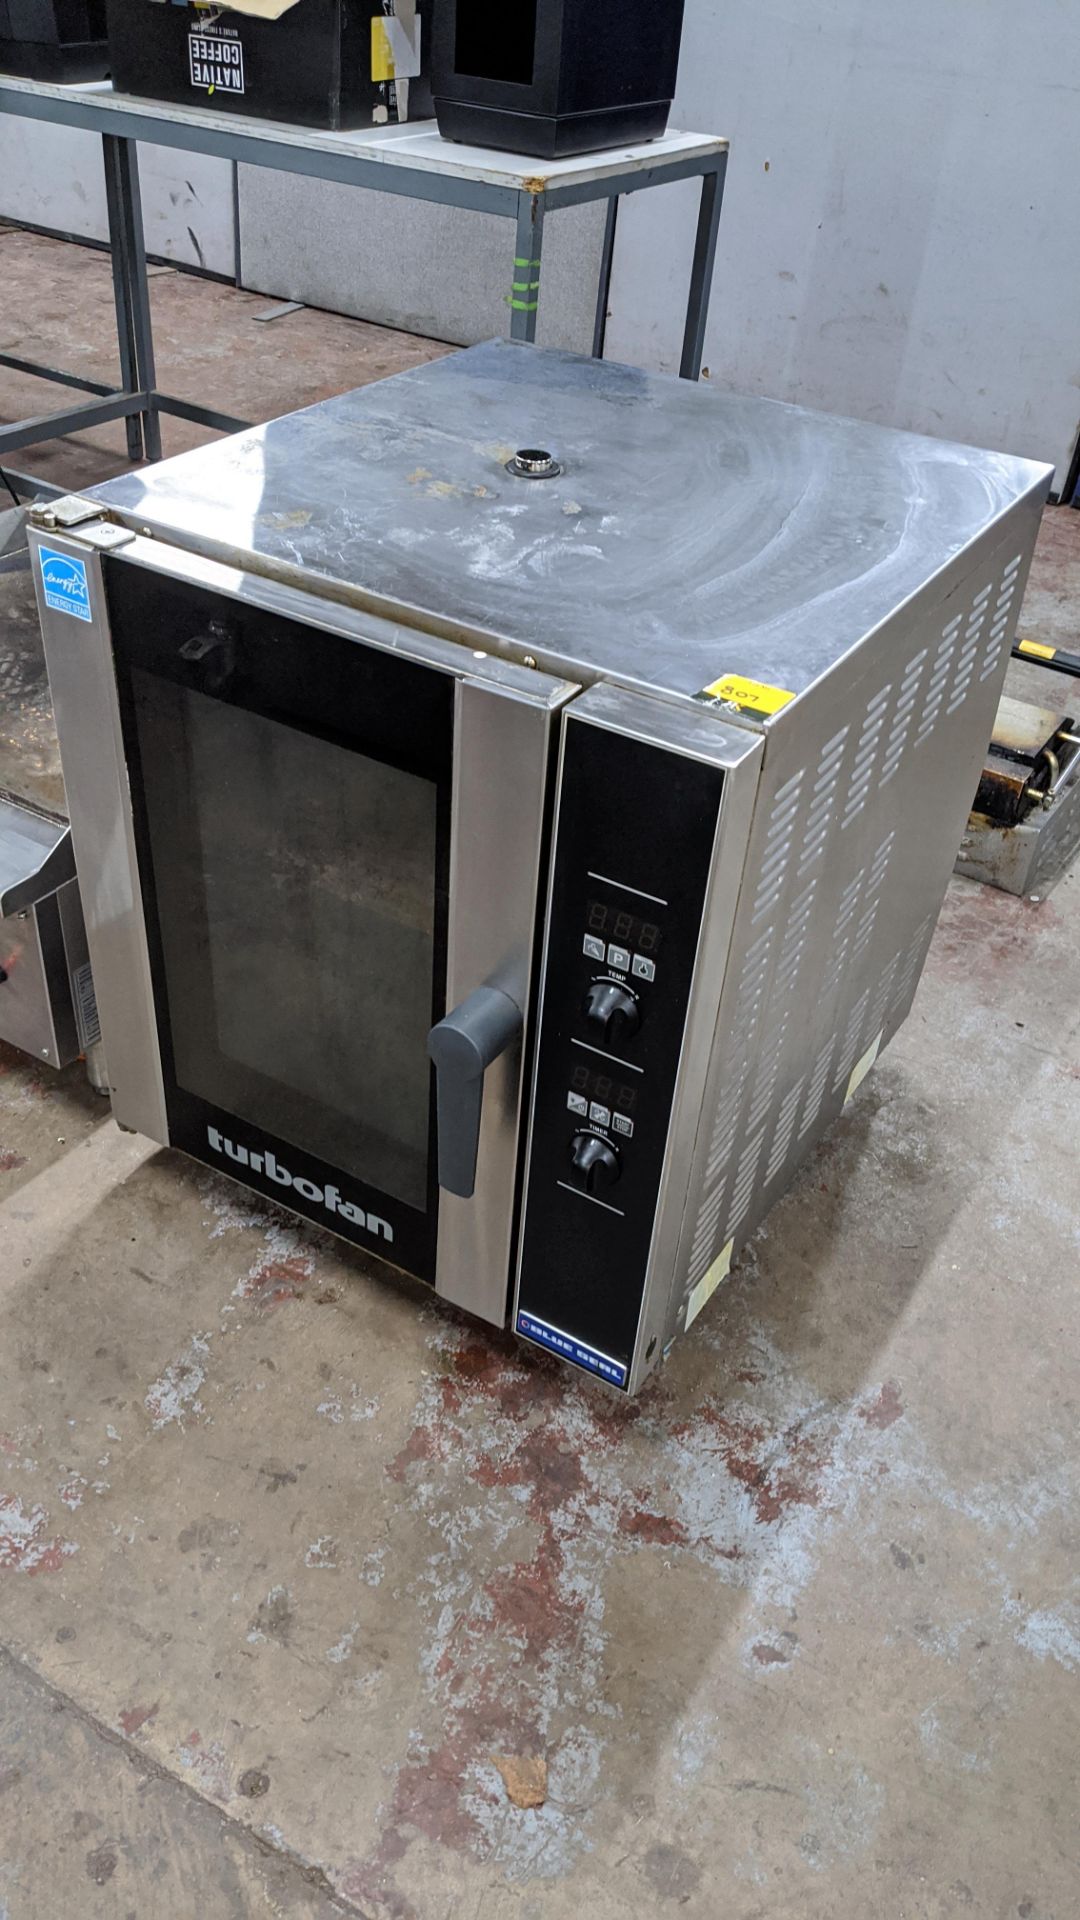 Blue Seal turbo fan oven, purchased new for £1,930 plus VAT. This item was purchased new in